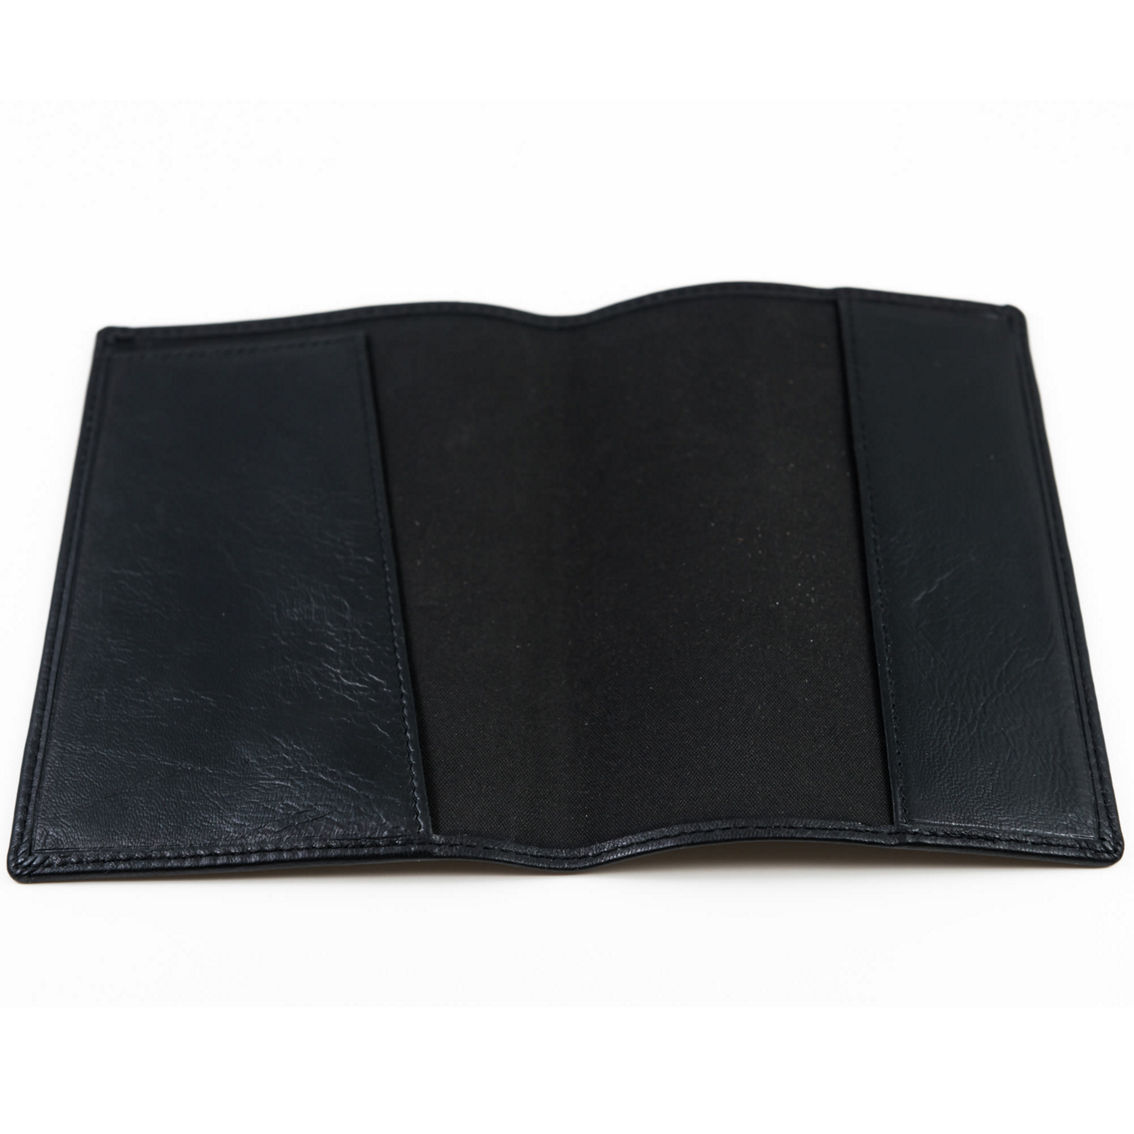 CHAMPS Genuine Leather Passport Holder - Image 3 of 4